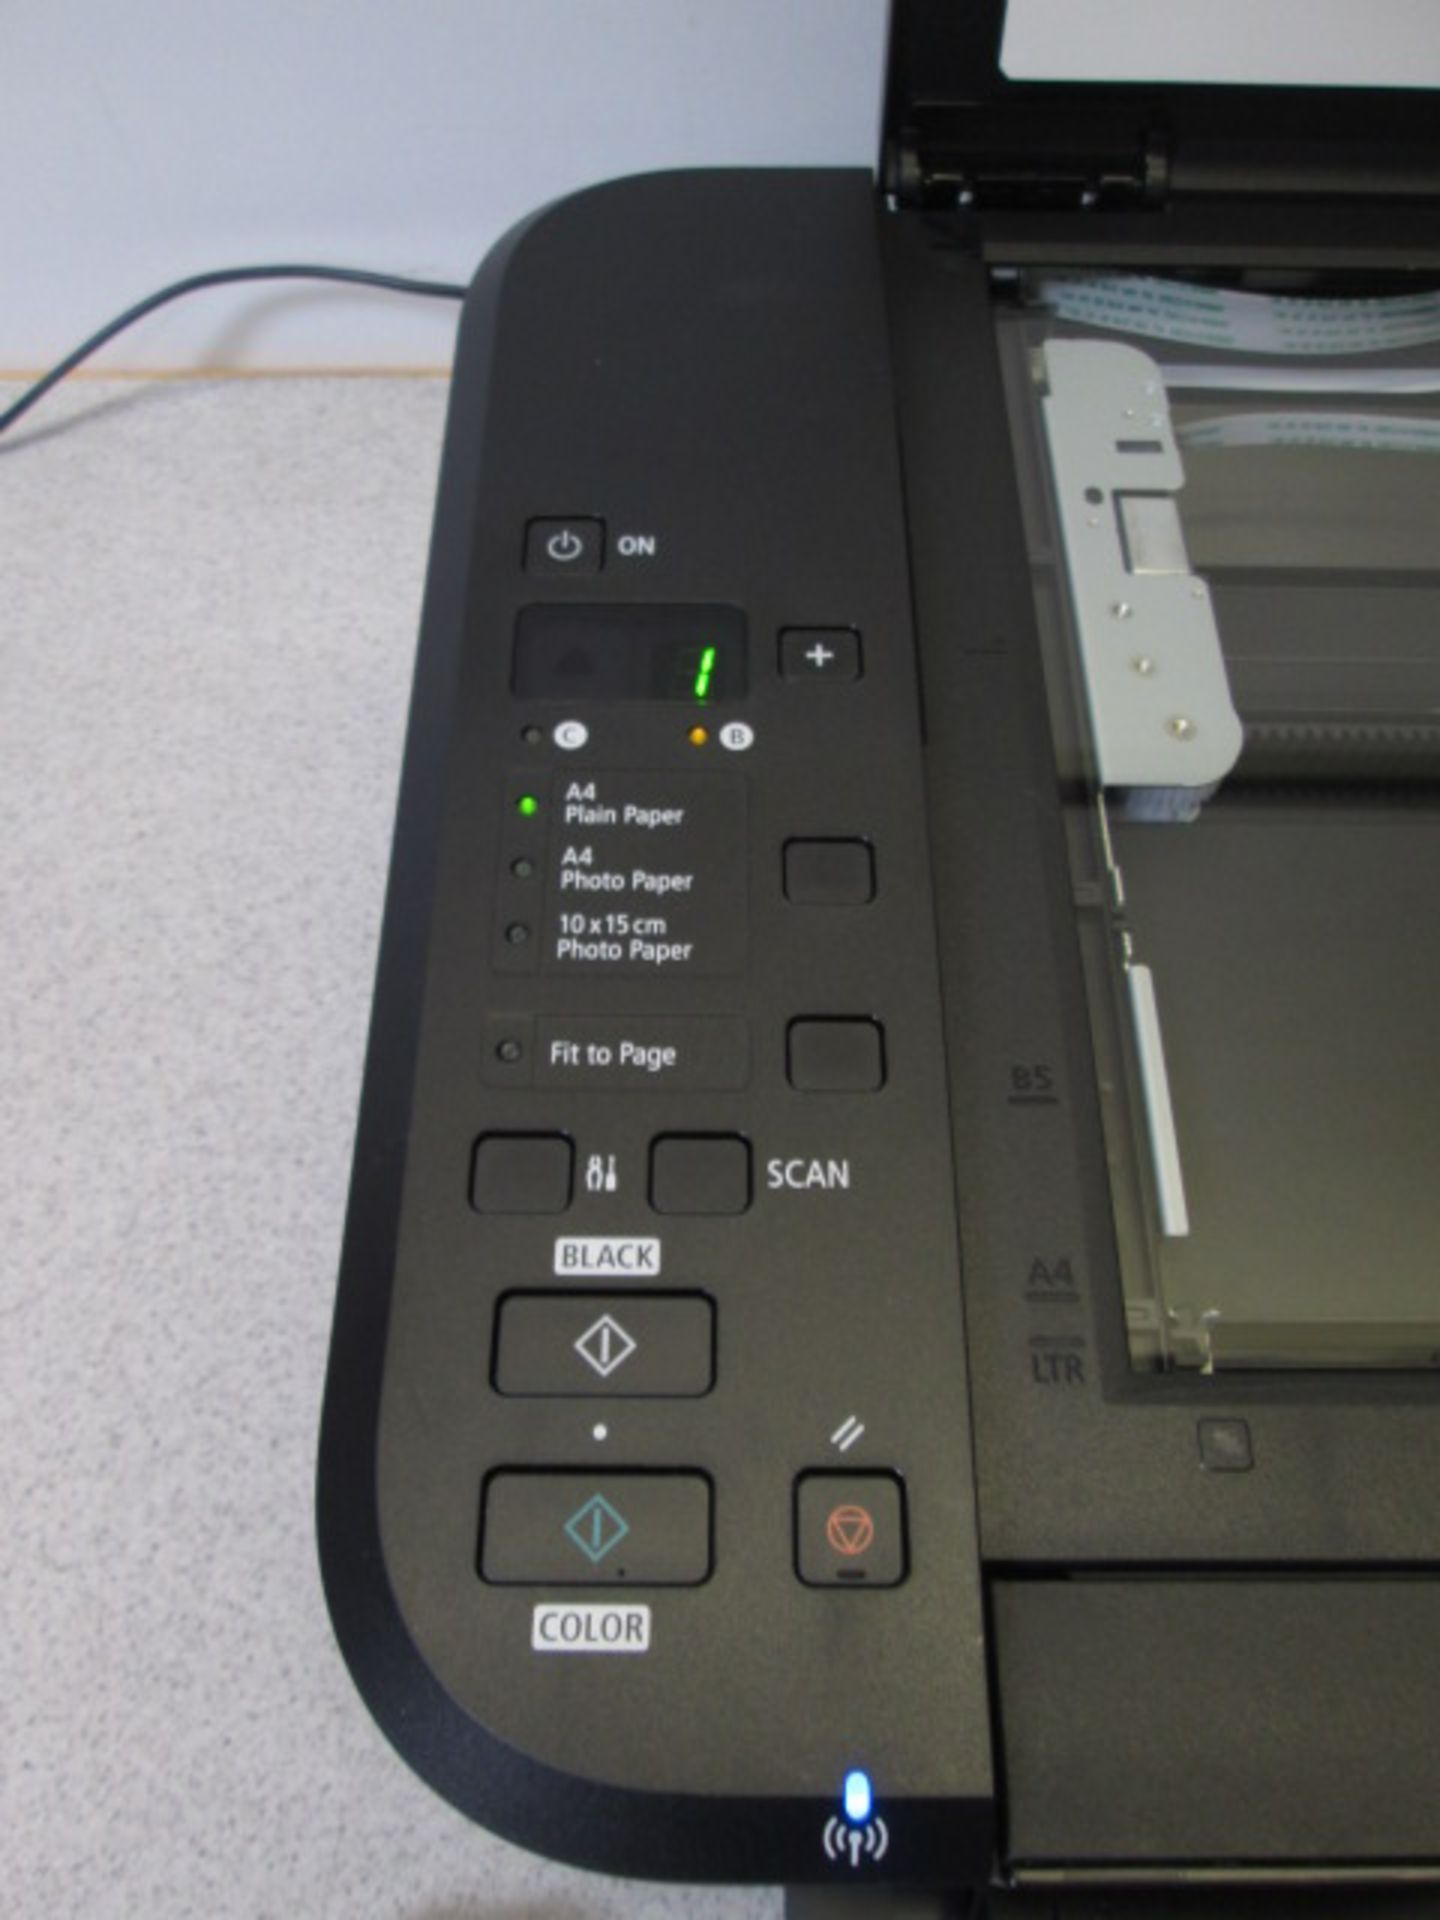 Canon PIXMA MG3250S Inkjet All-In-One Printer with Wi-Fi, Mobile Printing and Auto Duplex. Comes - Image 3 of 3